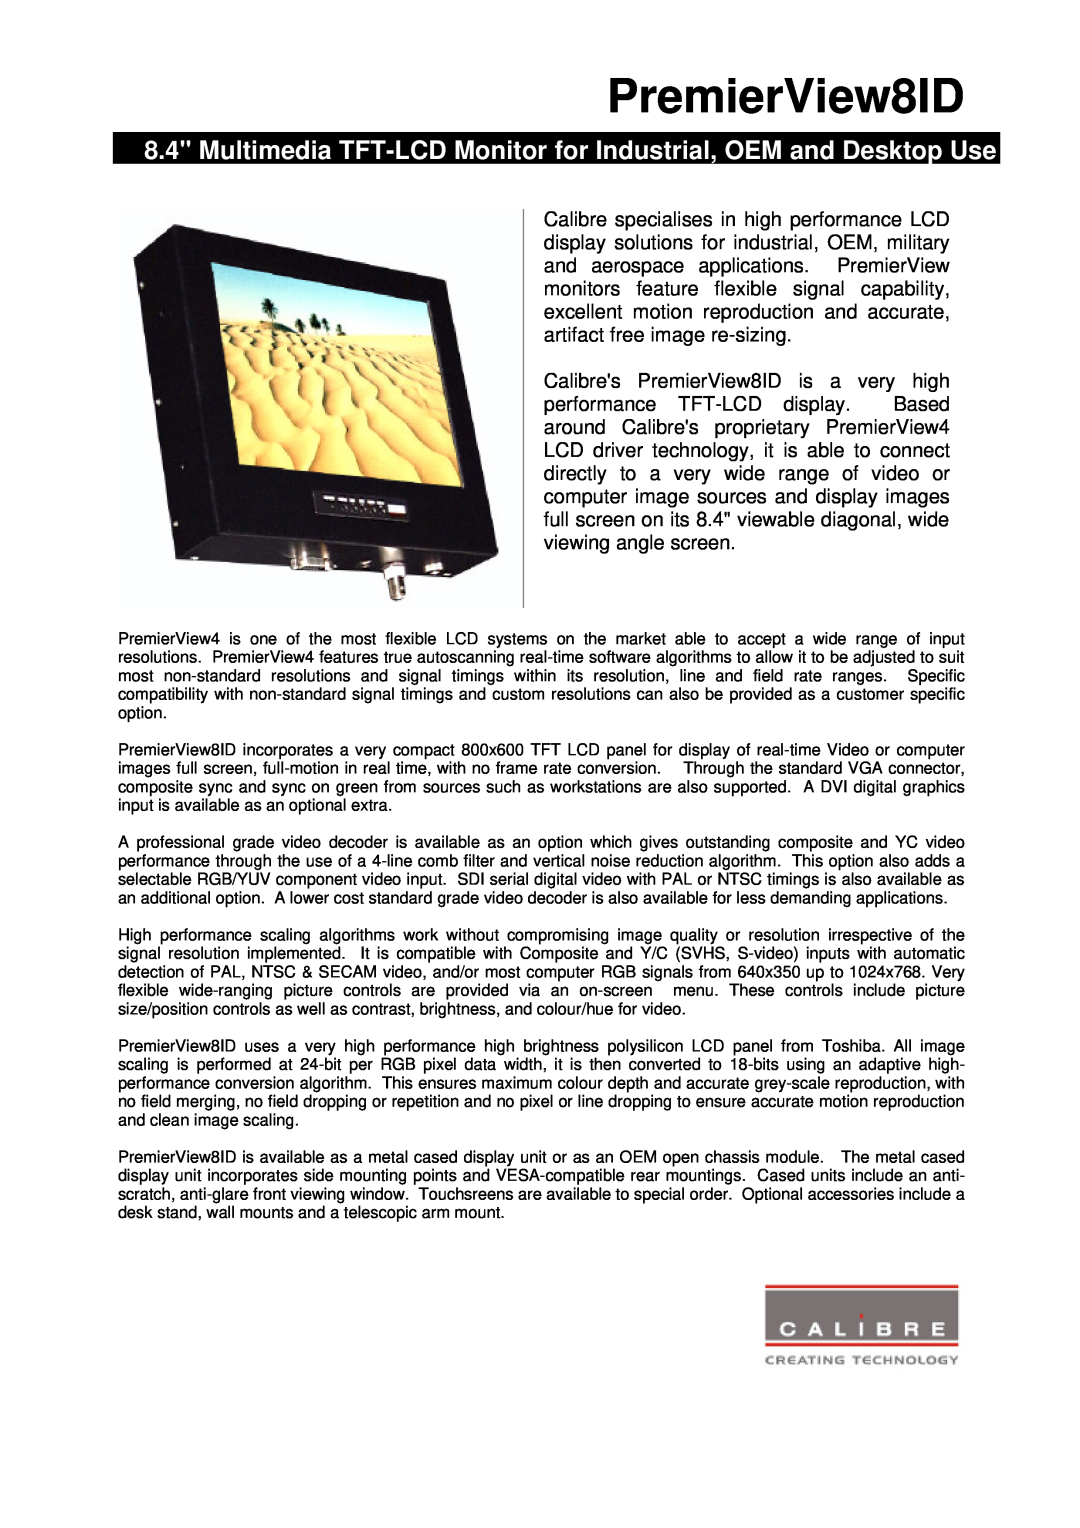 Calibre UK manual PremierView8ID, Multimedia TFT-LCD Monitor for Industrial, OEM and Desktop Use 